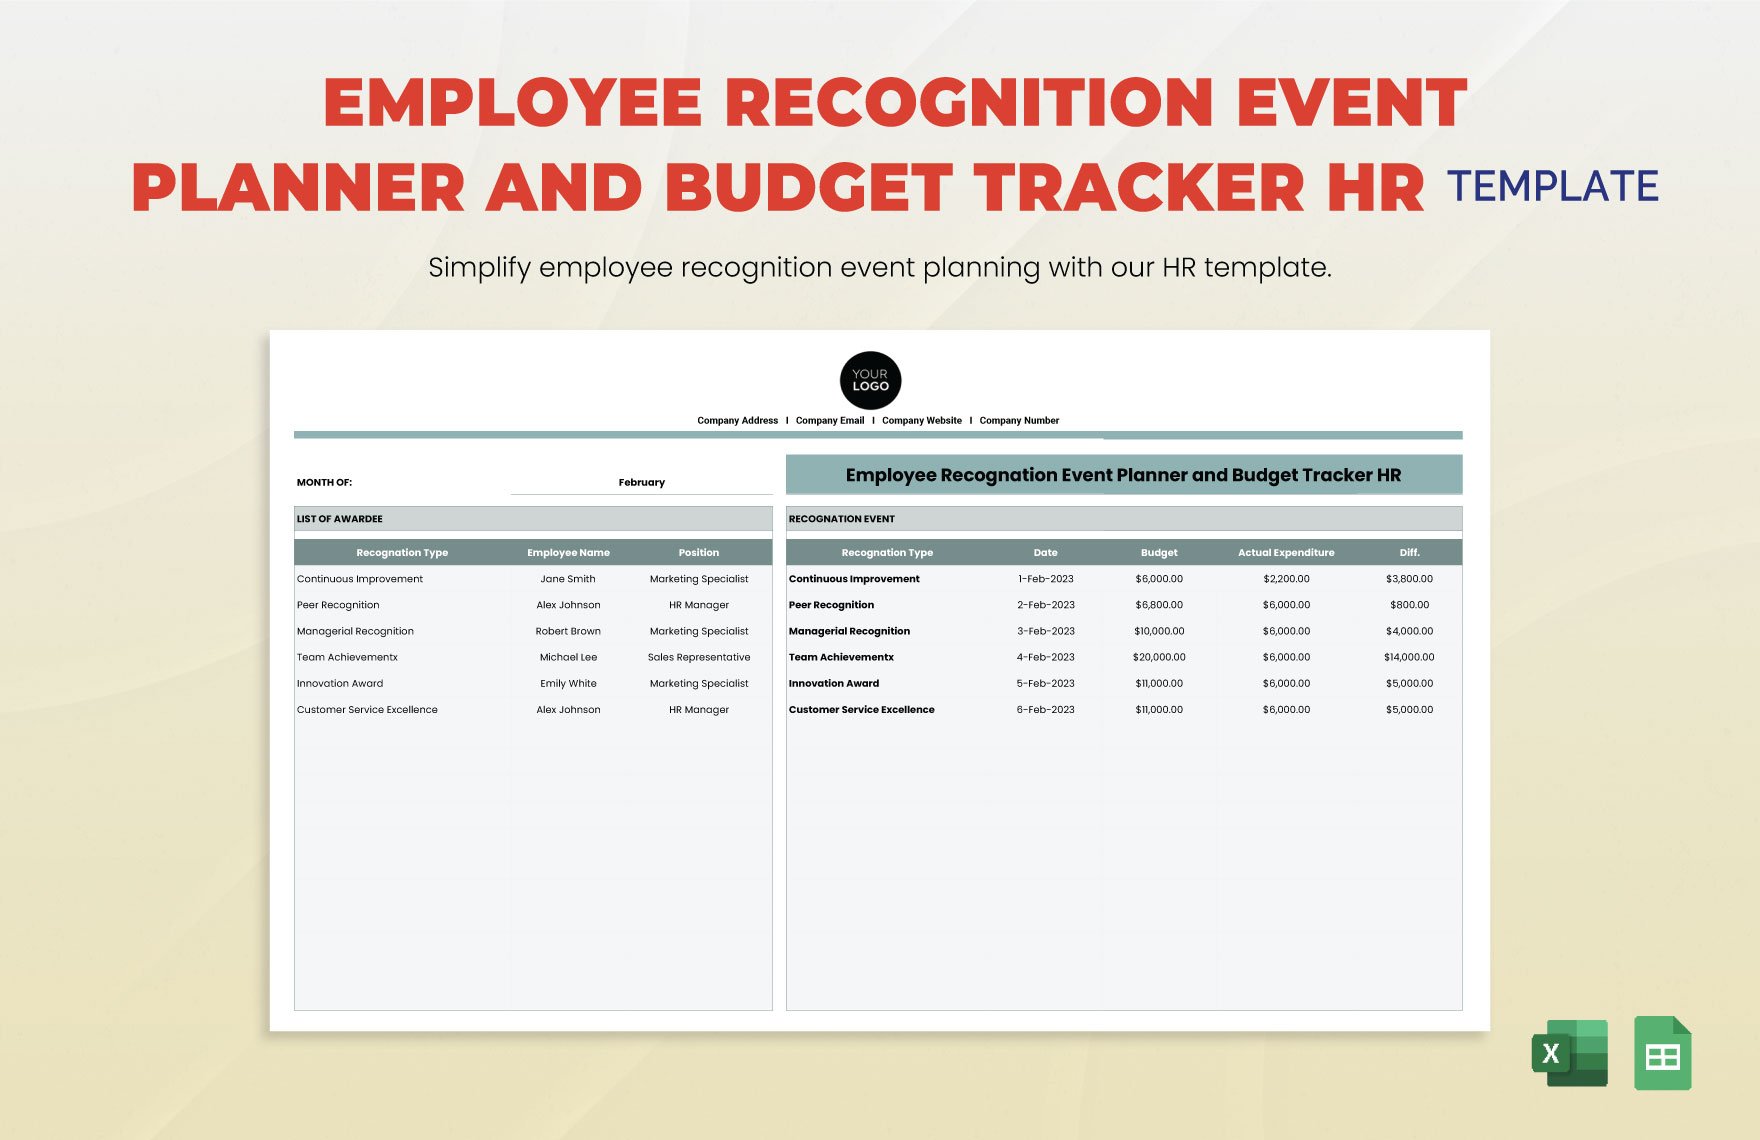 Employee Recognition Event Planner and Budget Tracker HR Template